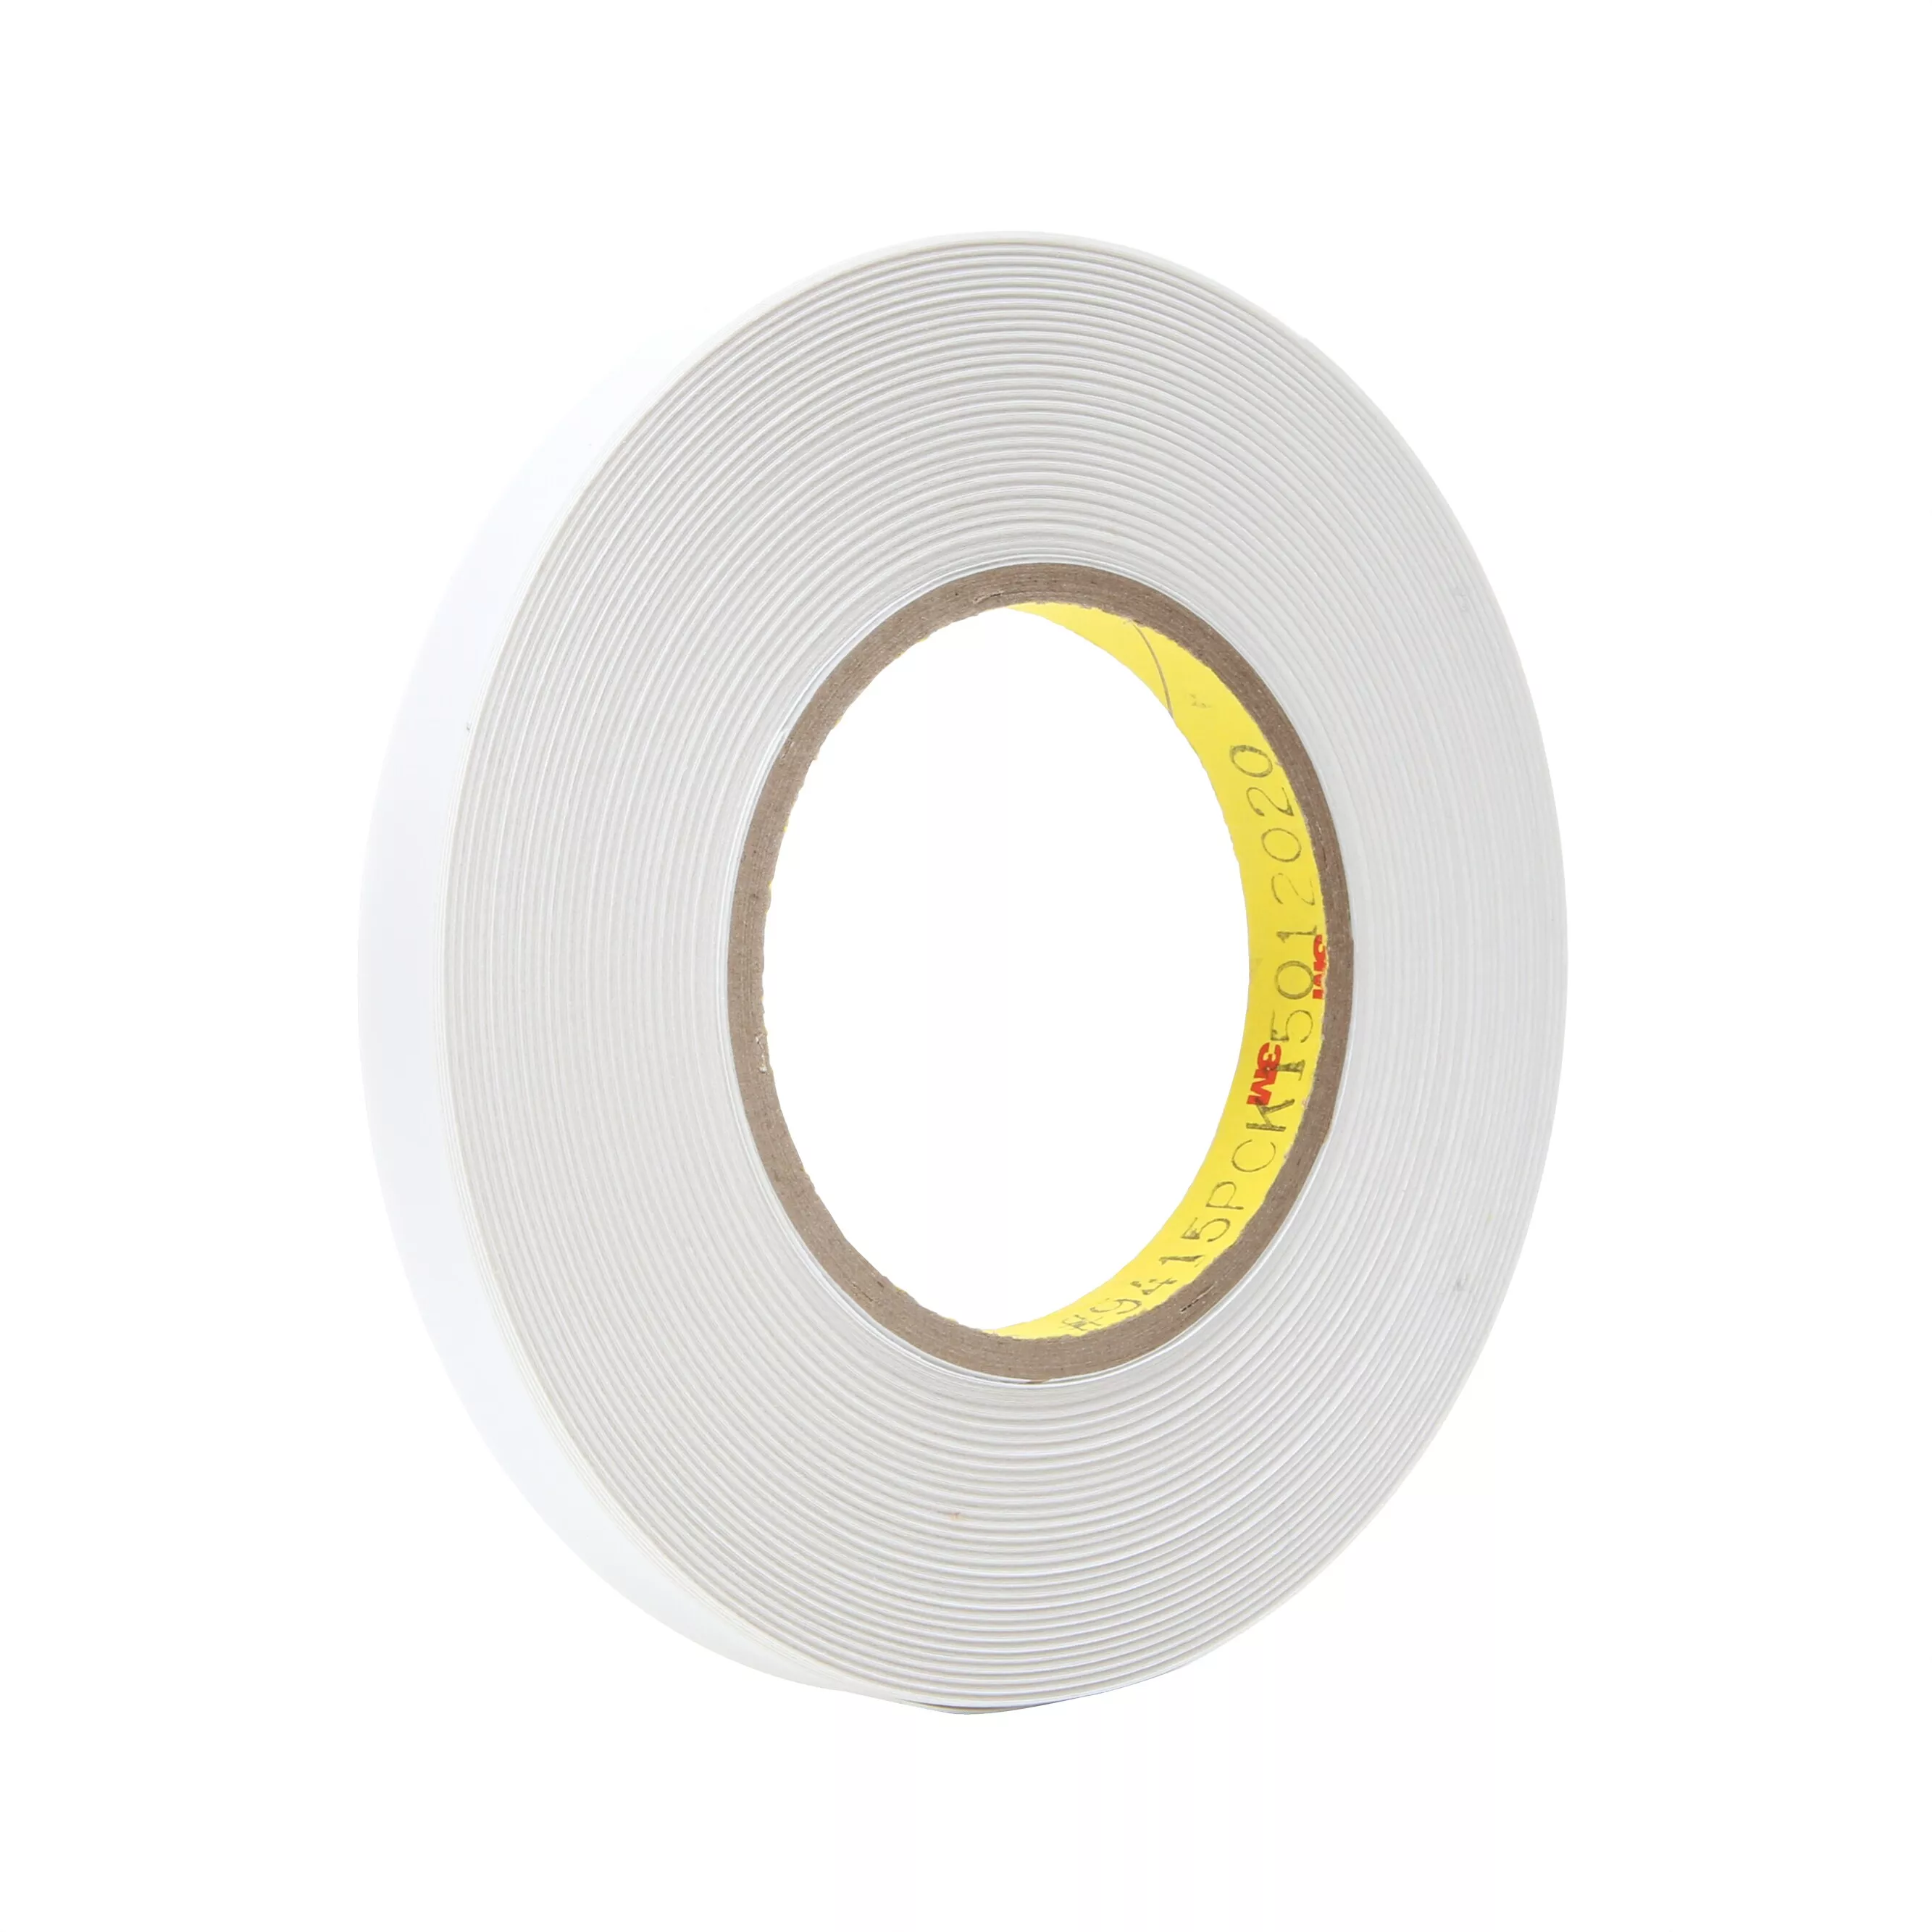 3M™ Removable Repositionable Tape 9415PC, Clear, 1 1/5 in x 144 yd, 2
mil, Unprinted, 6 Rolls/Case